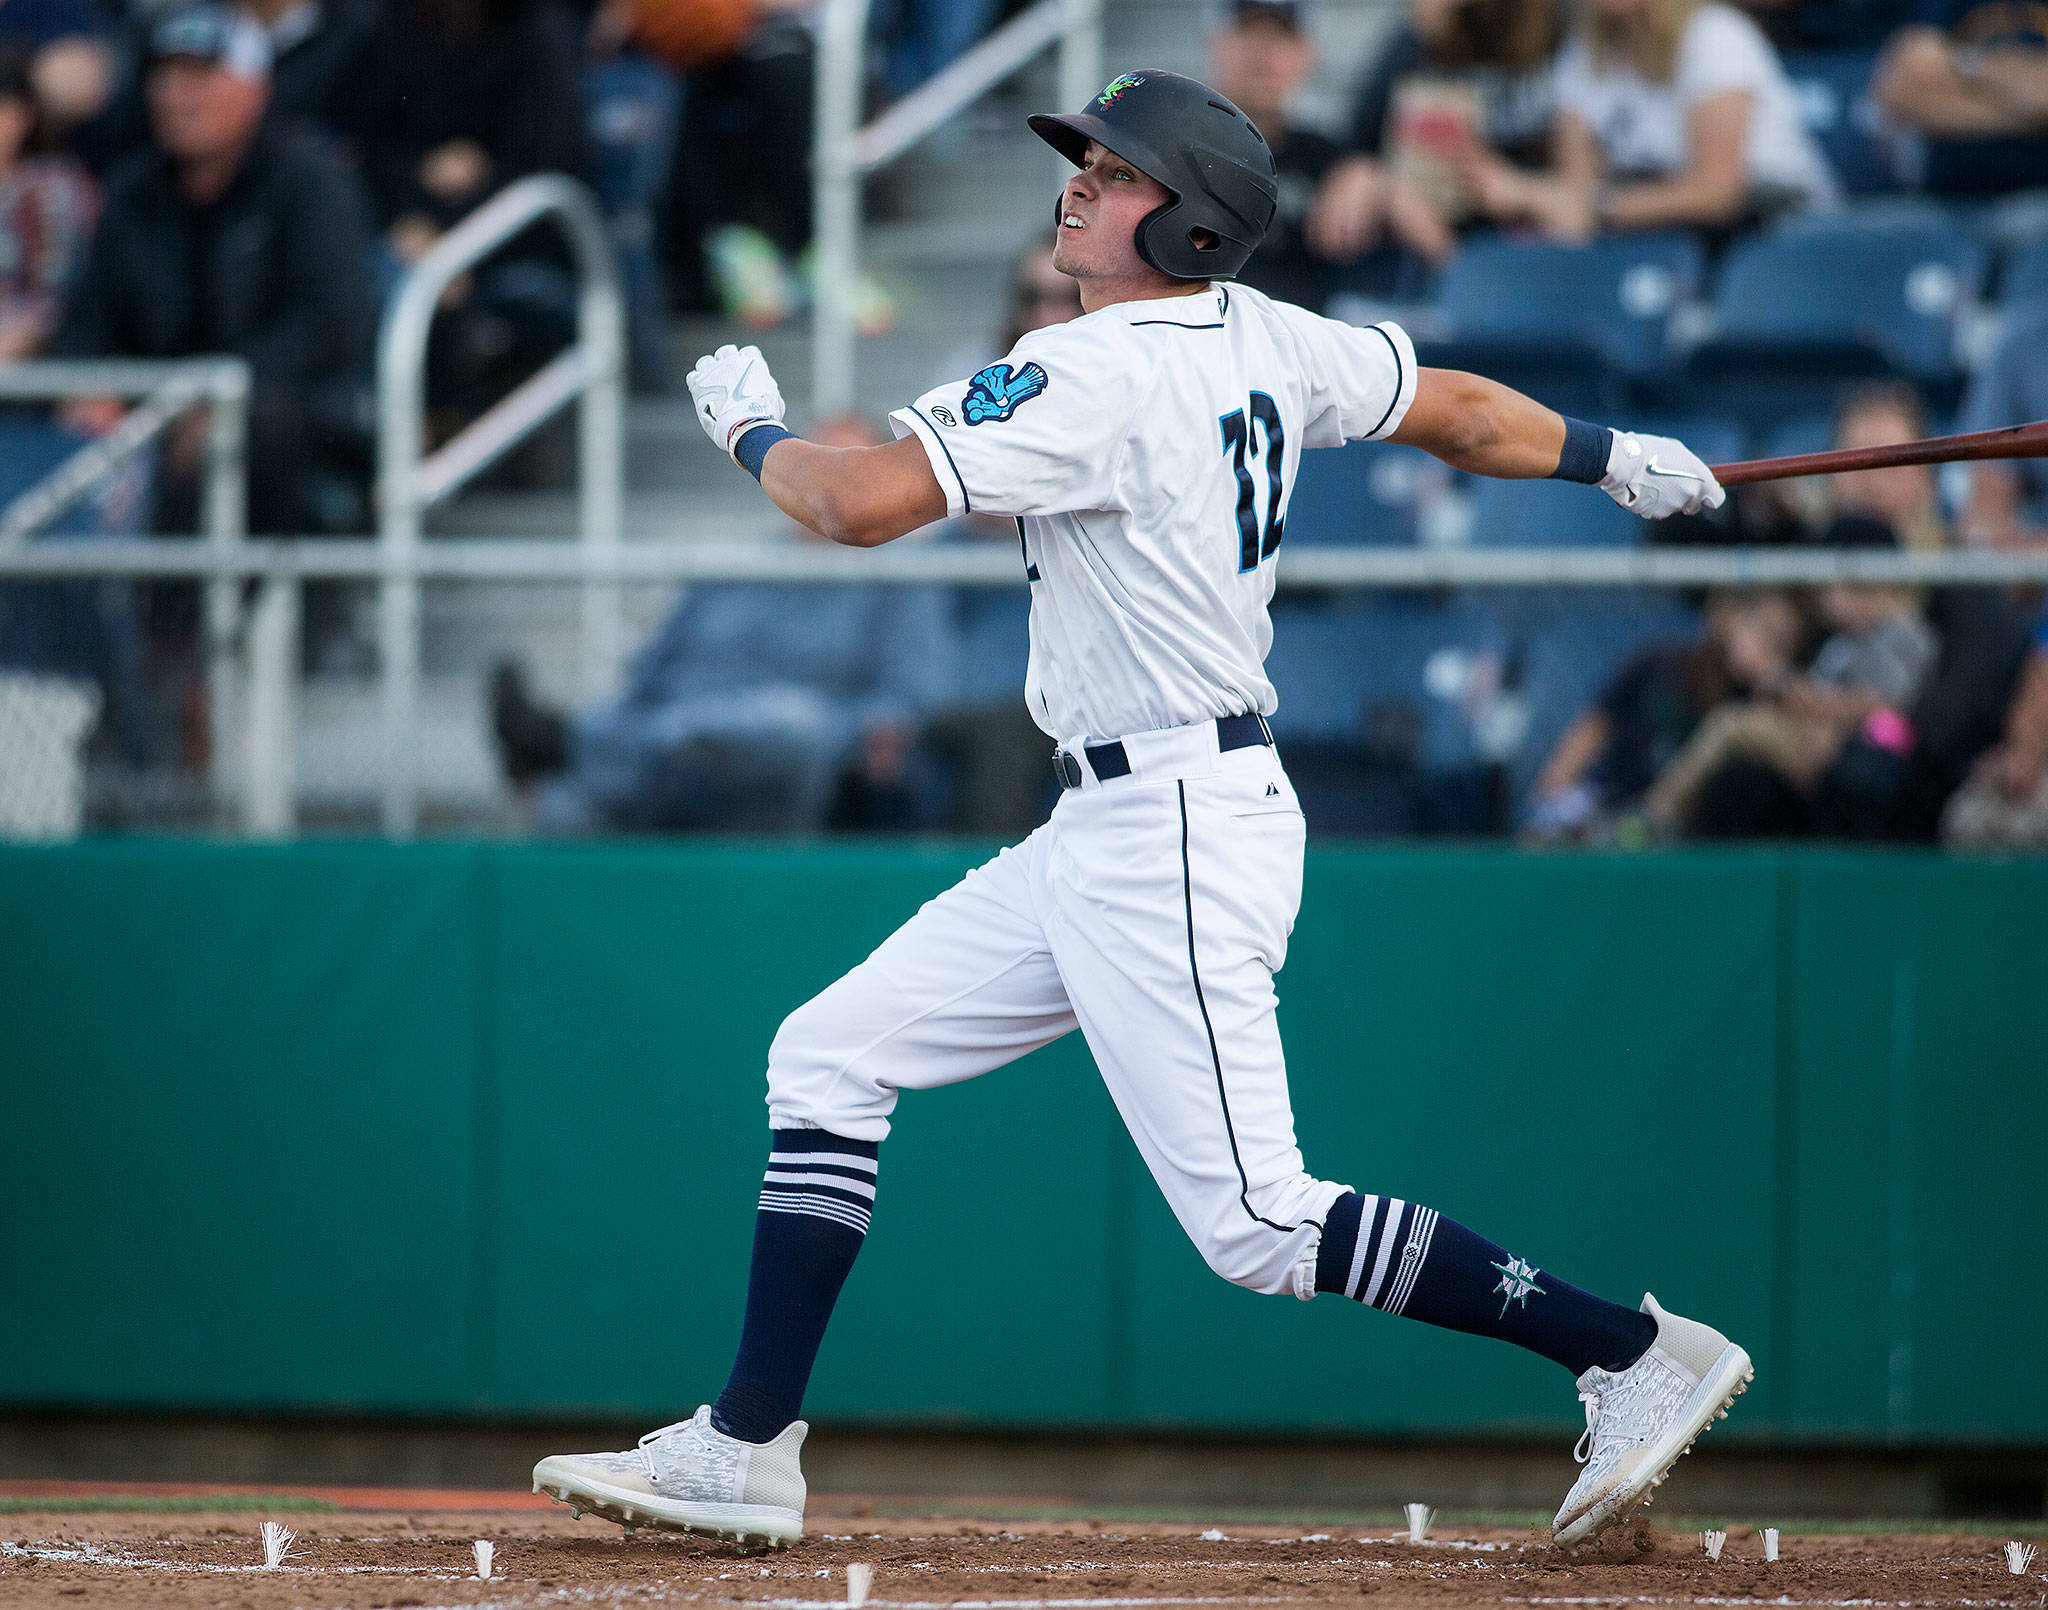 The AquaSox’s Cash Gladfelter watches as his ball sails over the wall for a three-run homer during Everett’s home opener against the Volcanoes on June 21, 2019, at Funko Field at Everett Memorial Stadium. (Andy Bronson / The Herald)